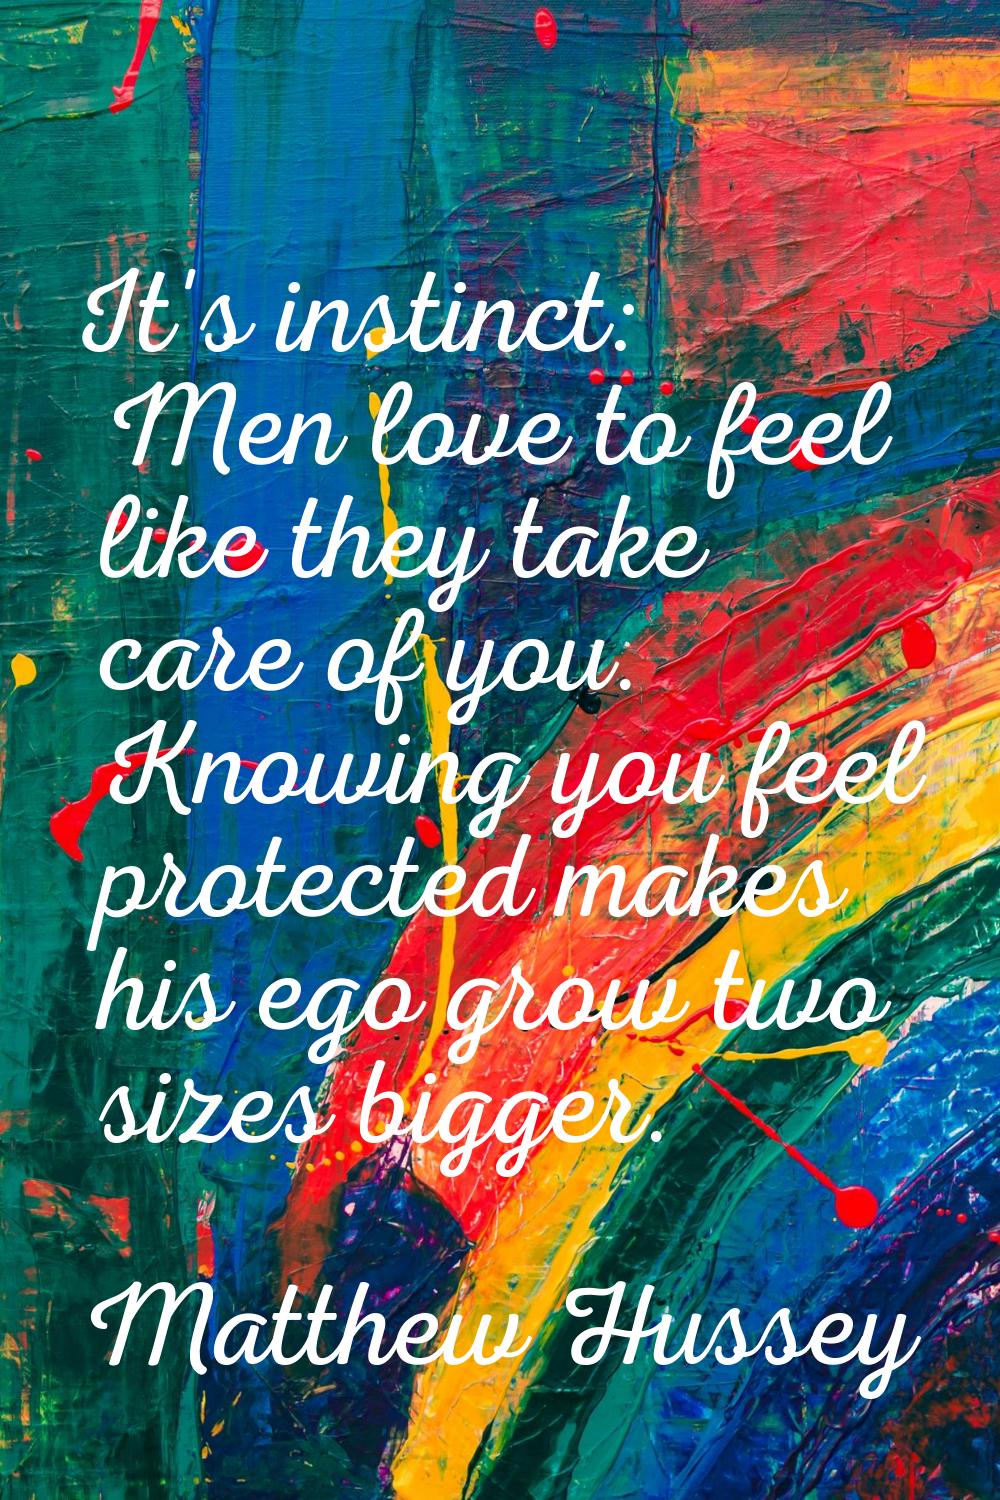 It's instinct: Men love to feel like they take care of you. Knowing you feel protected makes his eg